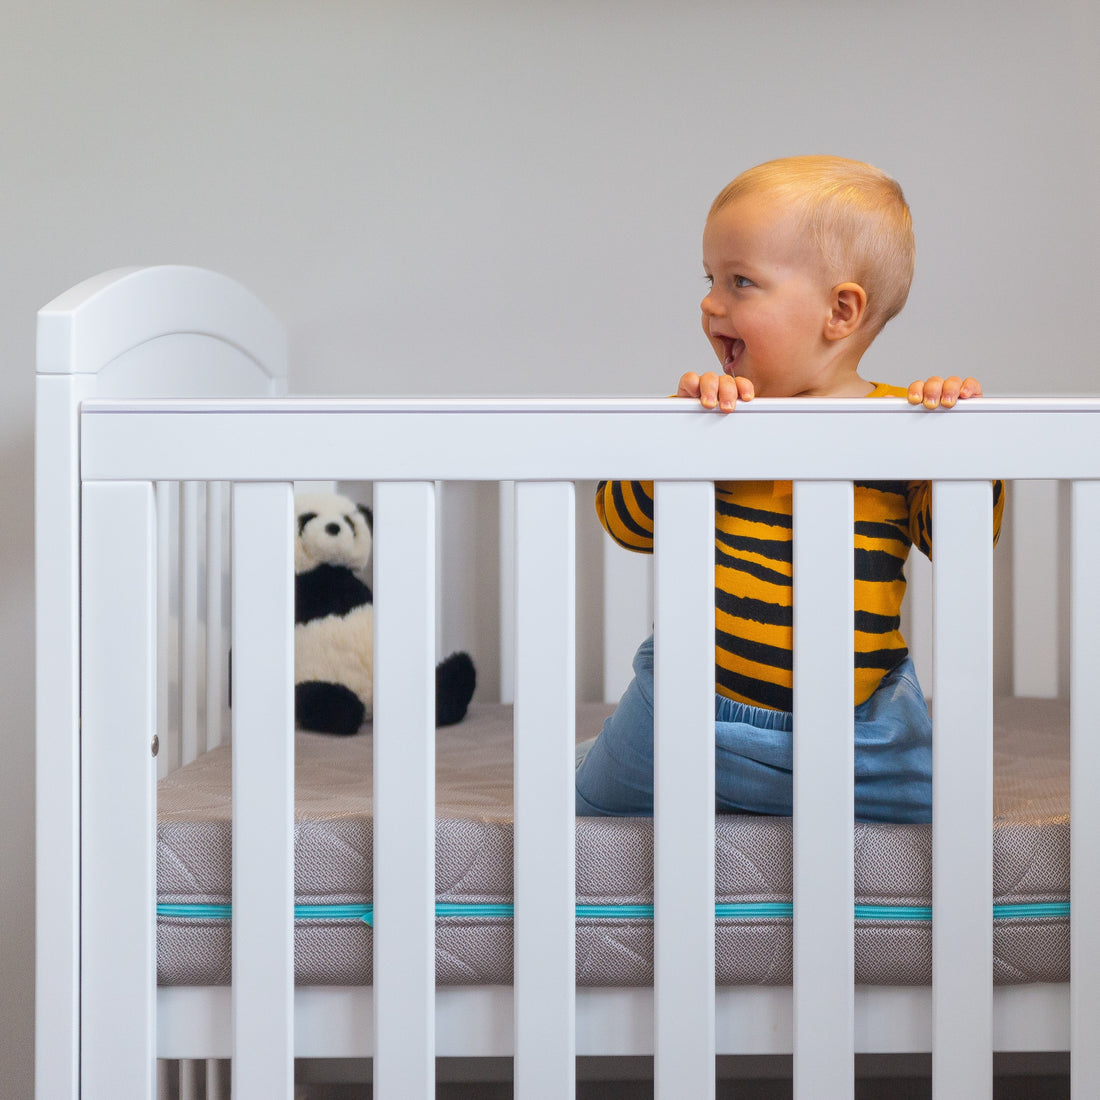 What to look for in a cot